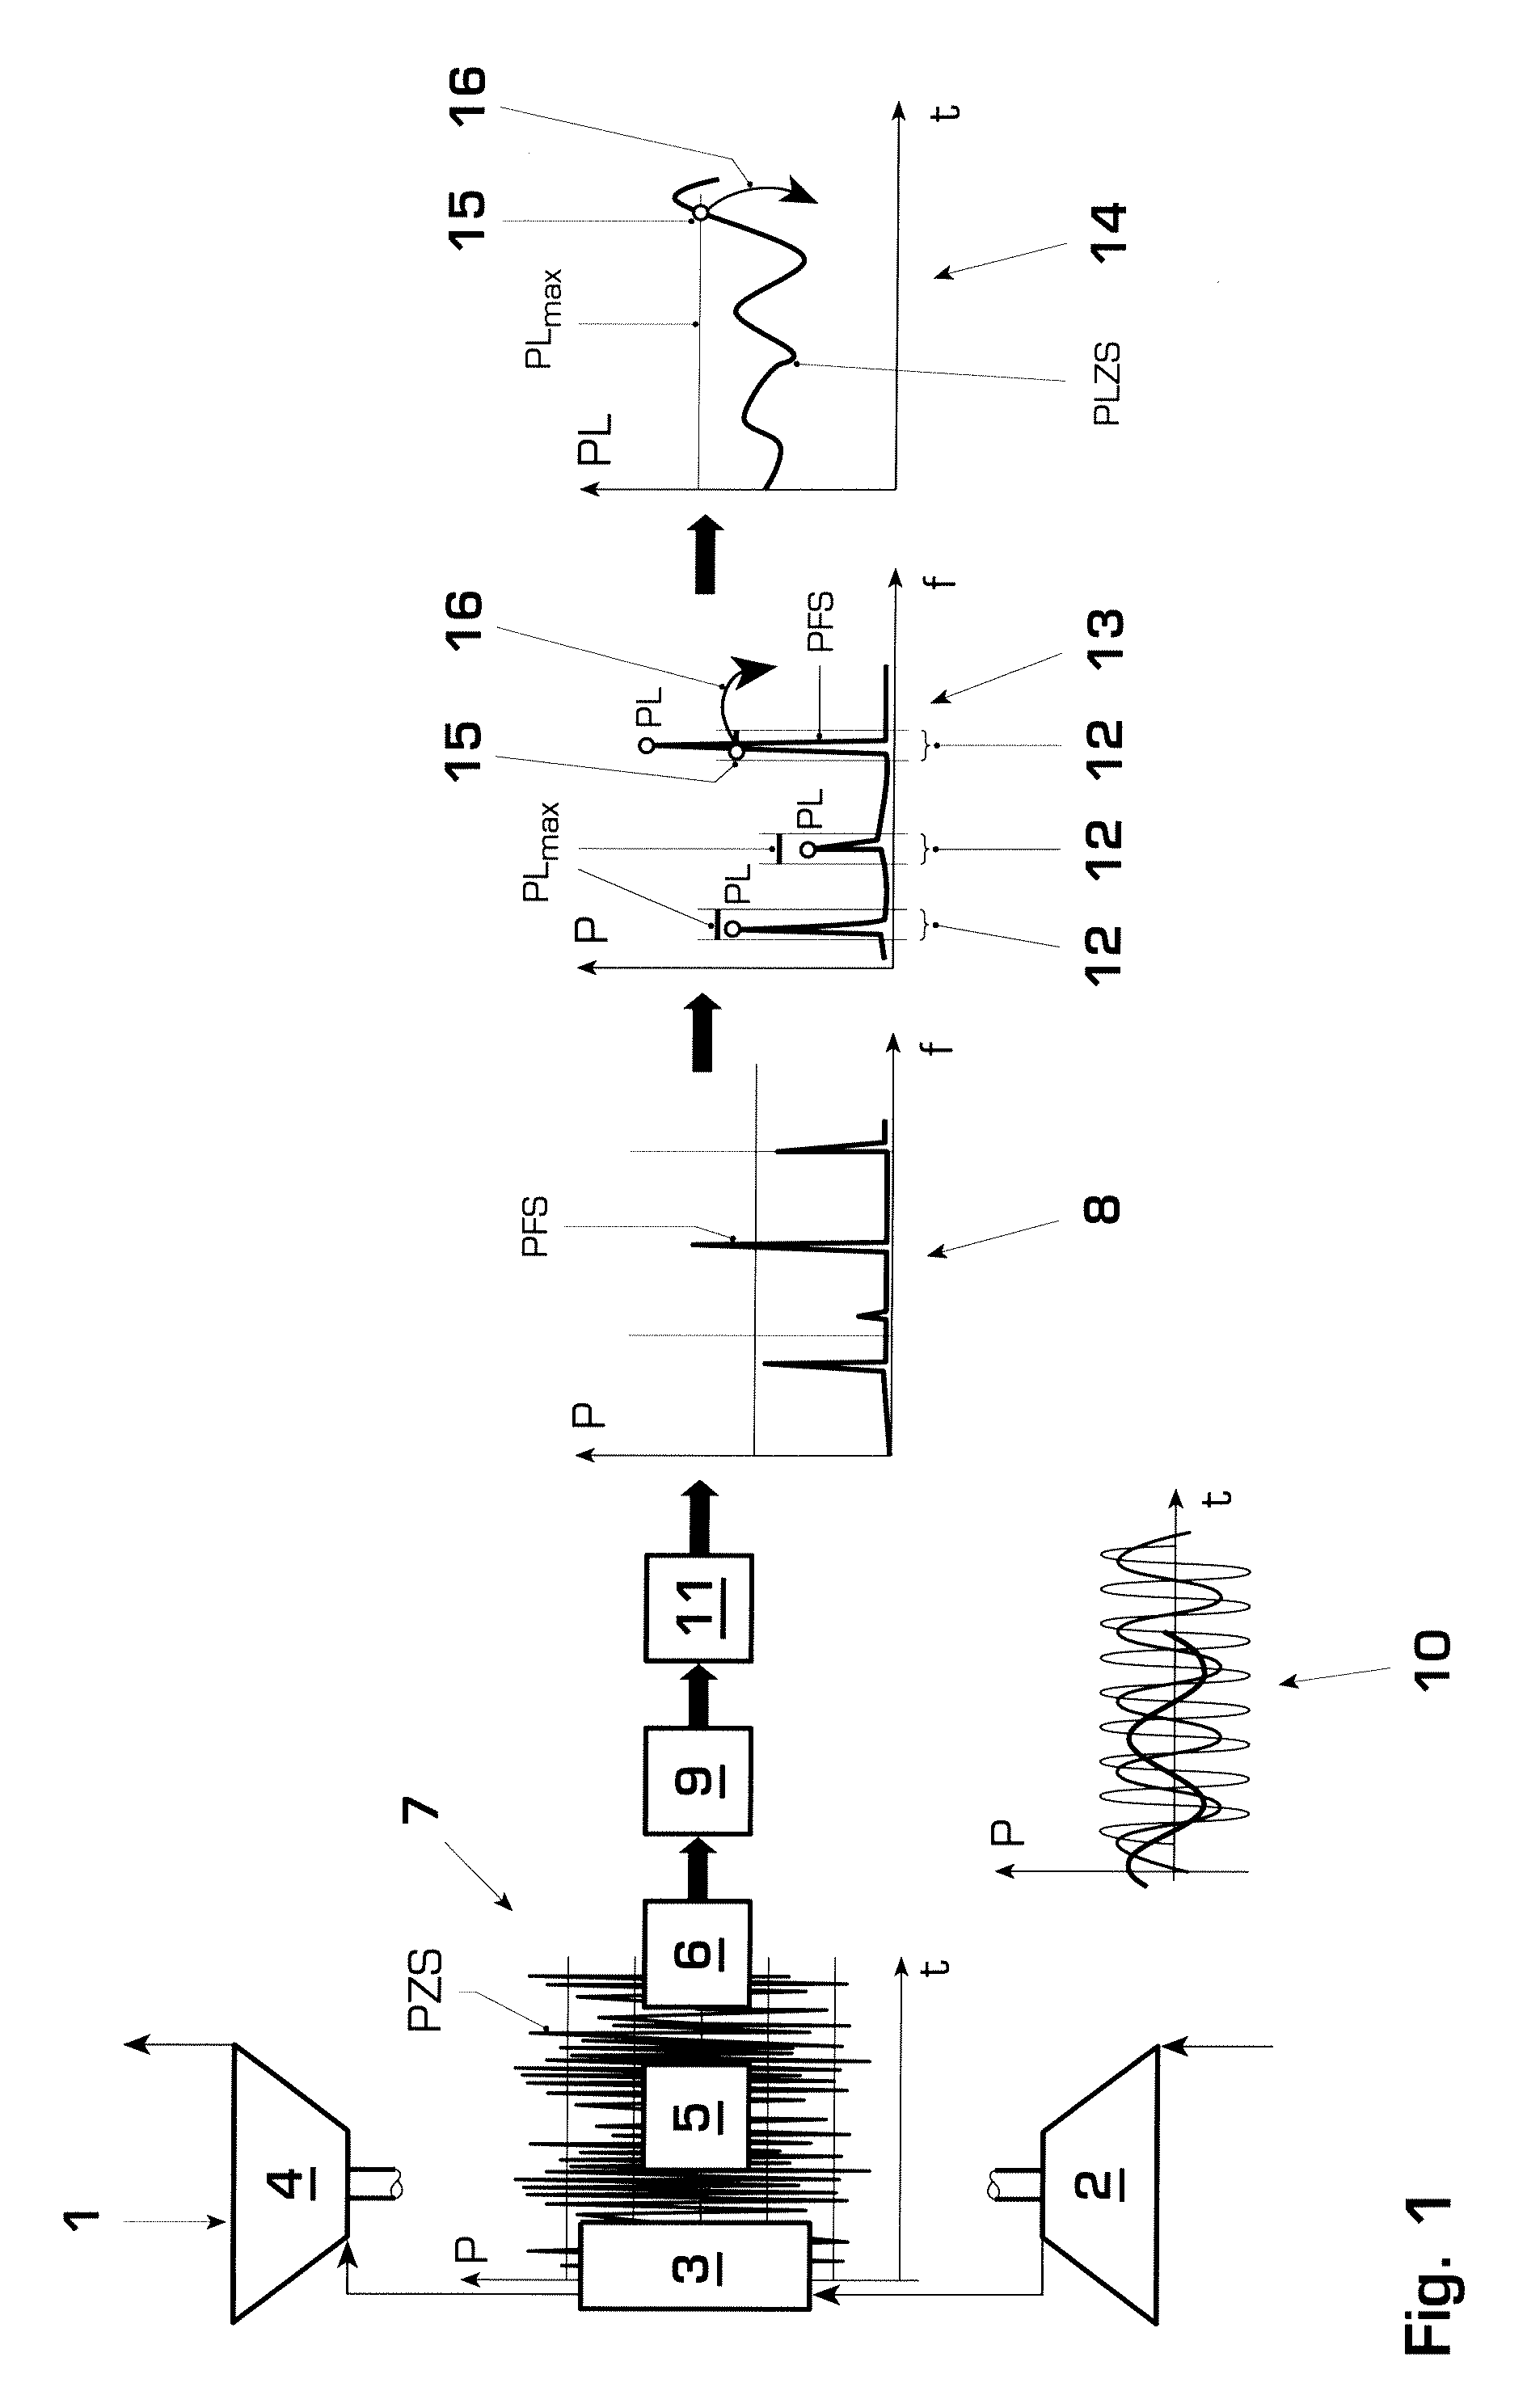 Protection process and control system for a gas turbine